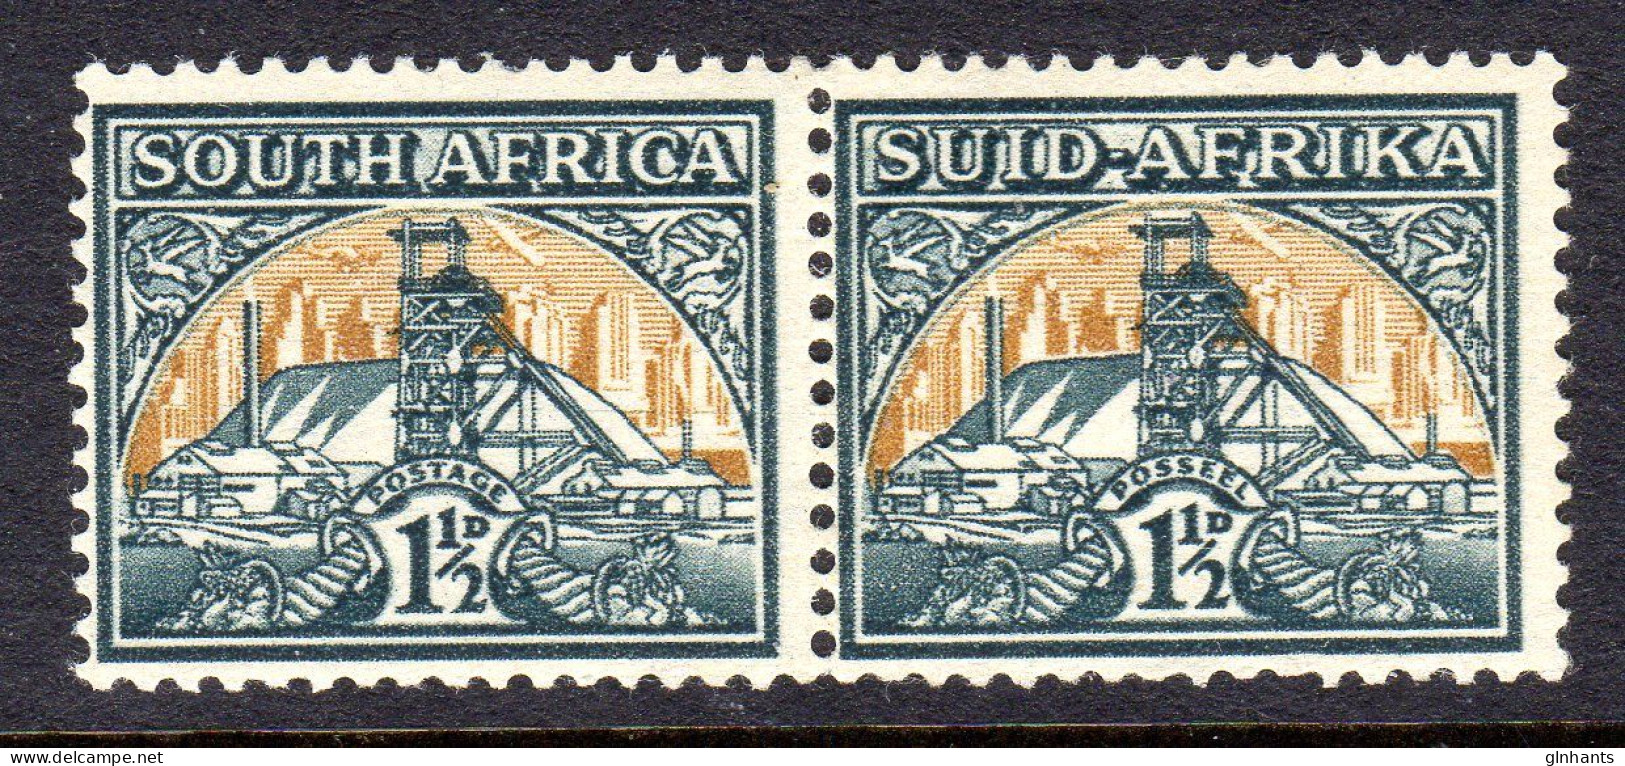 SOUTH AFRICA - 1941 GOLD MINE DEFINITIVE 1½d PAIR FINE LIGHTLY MOUNTED MINT LMM * SG 87 REF B - Unused Stamps